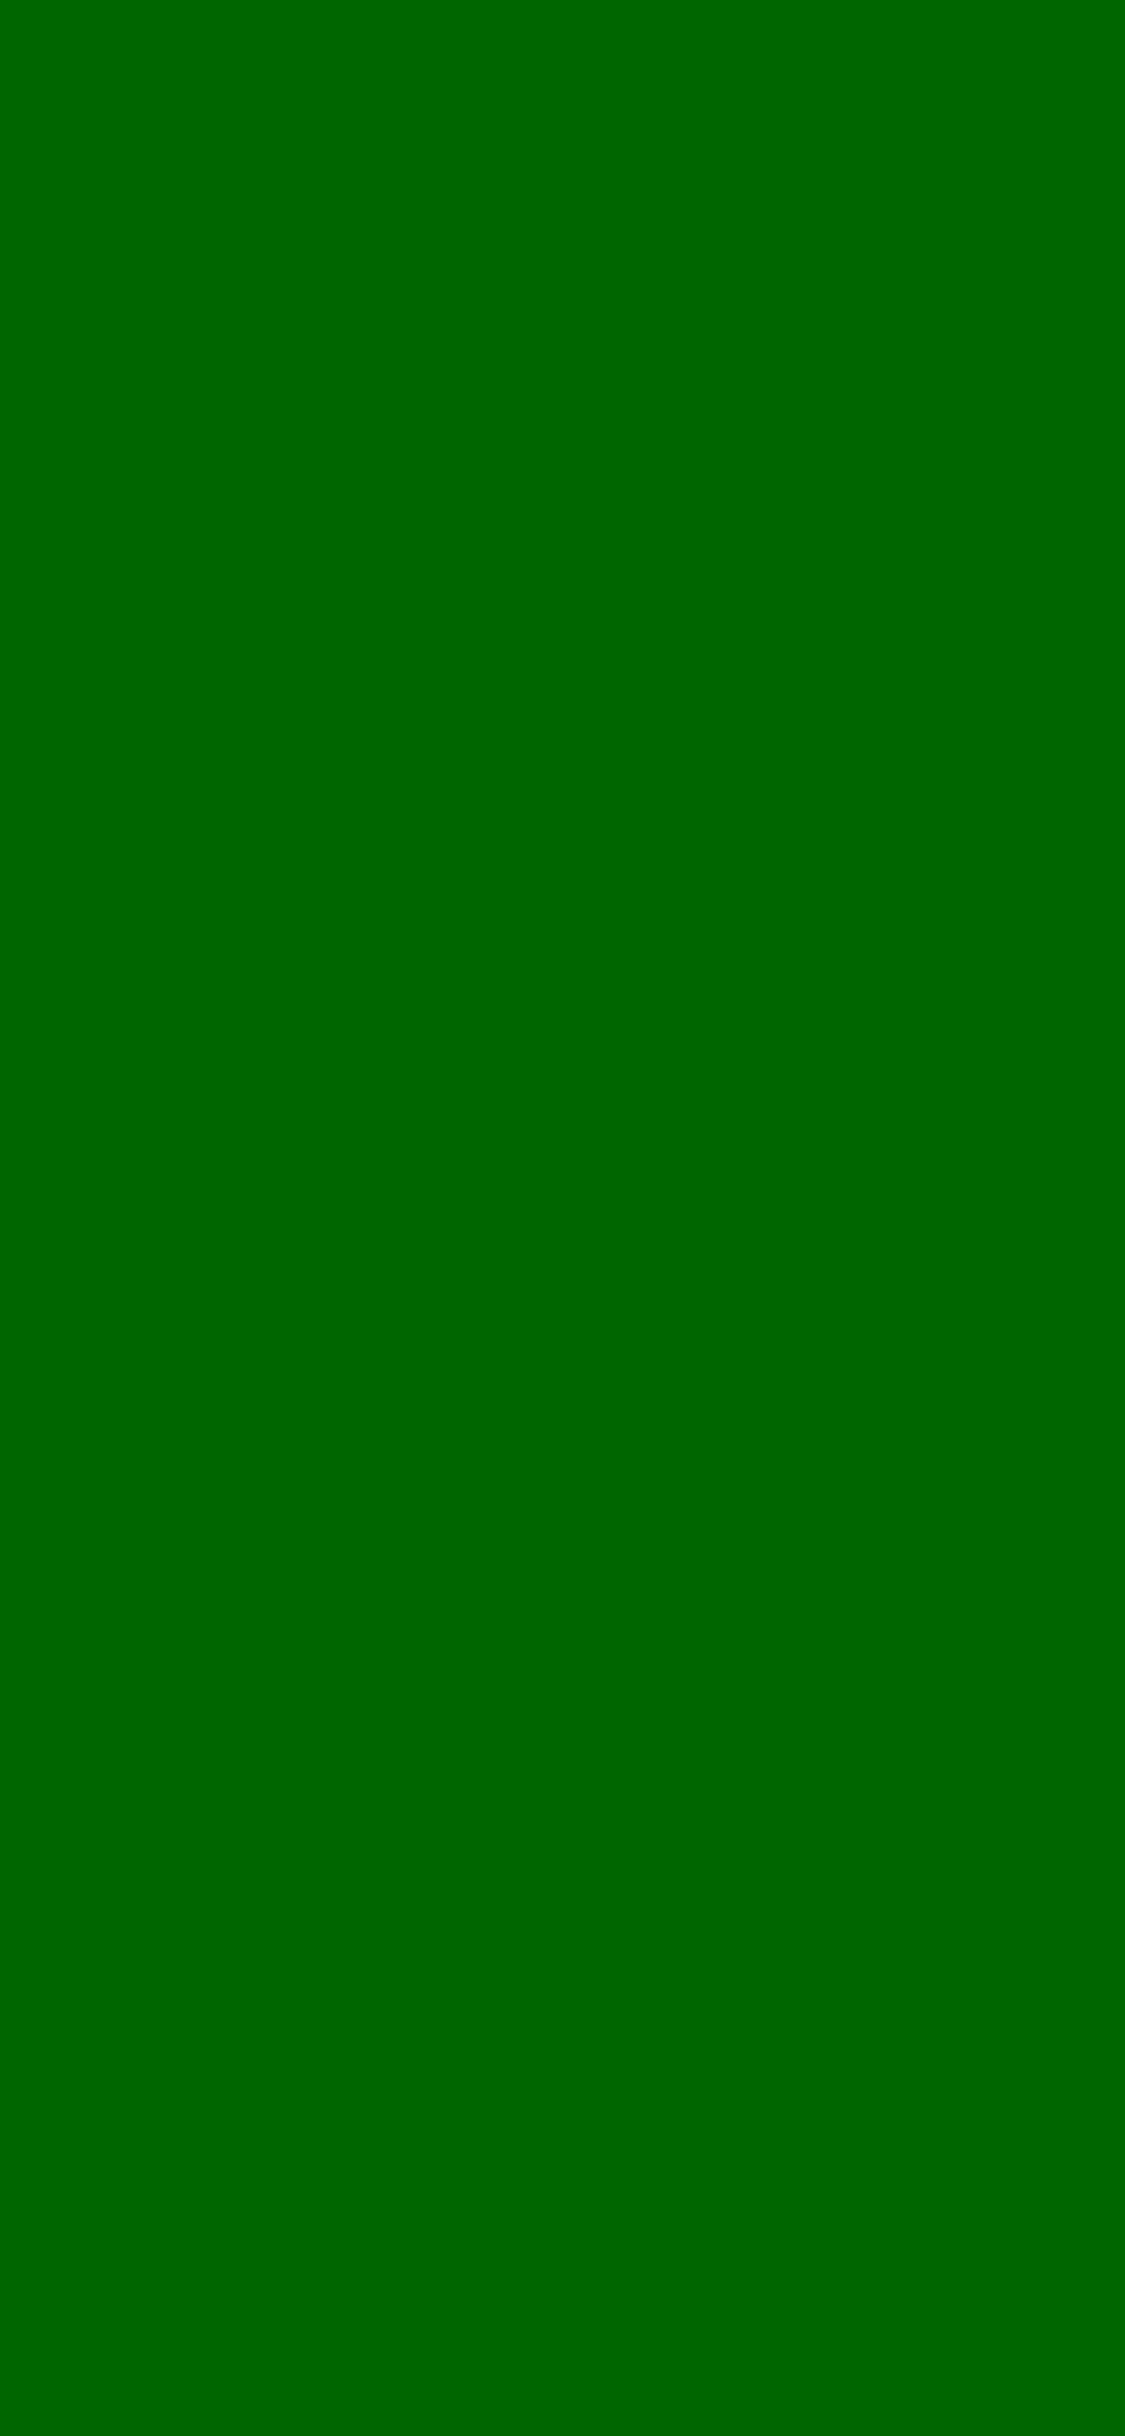 1125x2436 Pakistan Green Solid Color Background